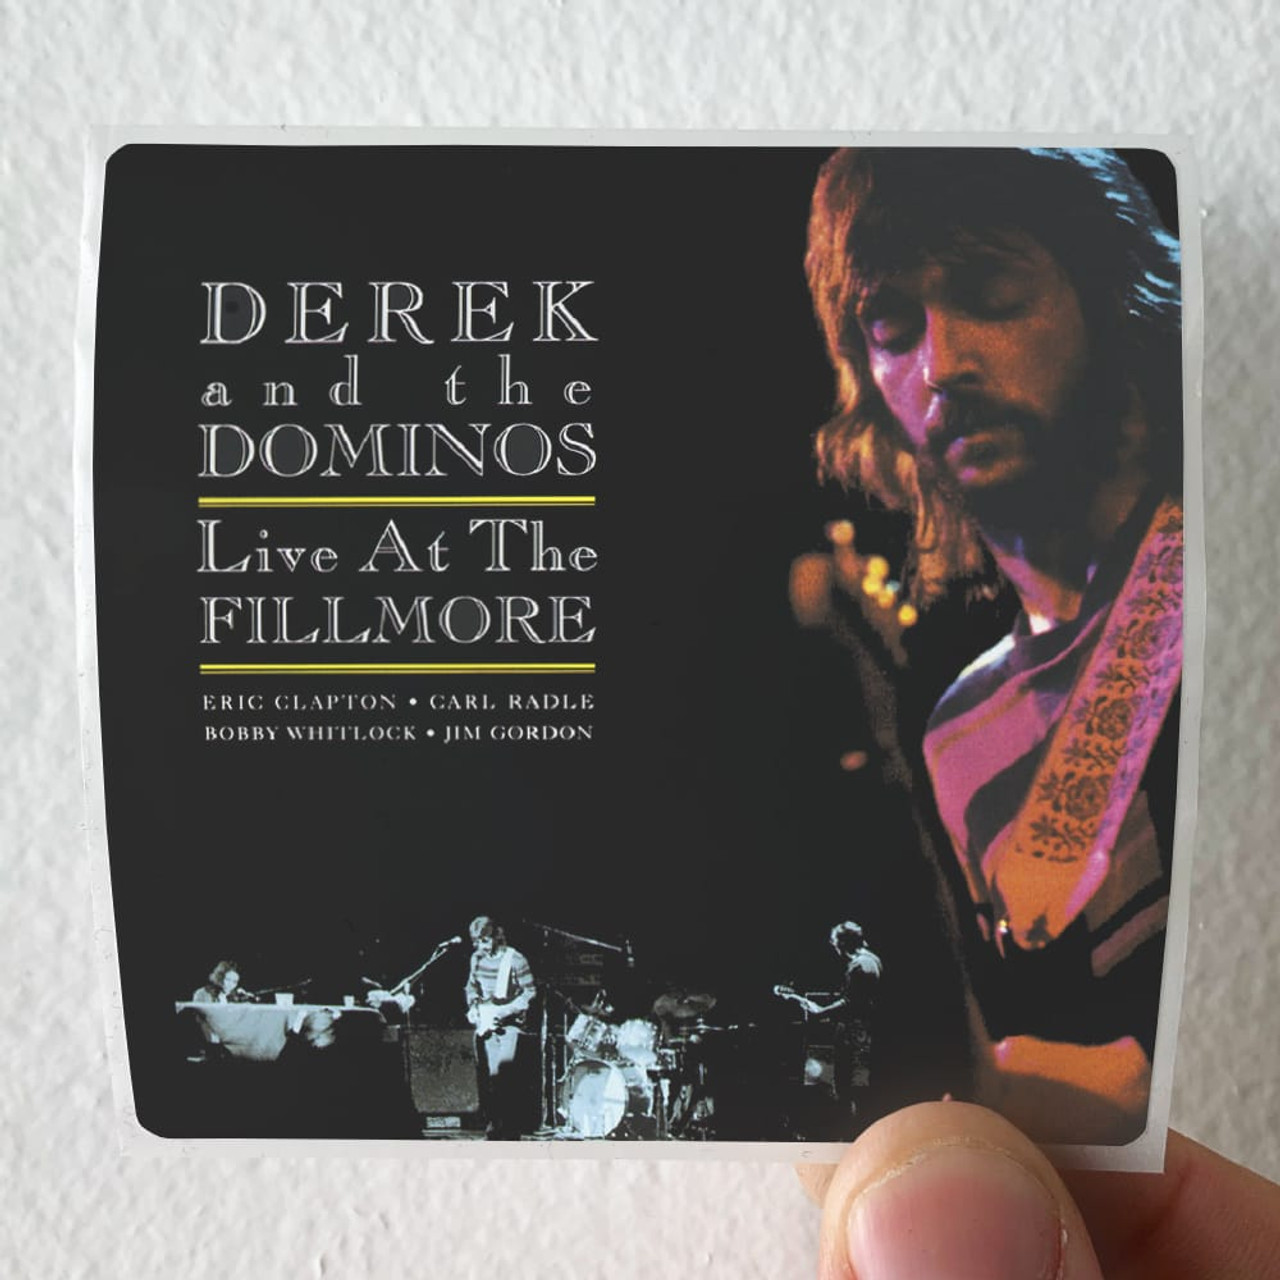 Derek and the Dominos Live At The Fillmore Album Cover Sticker